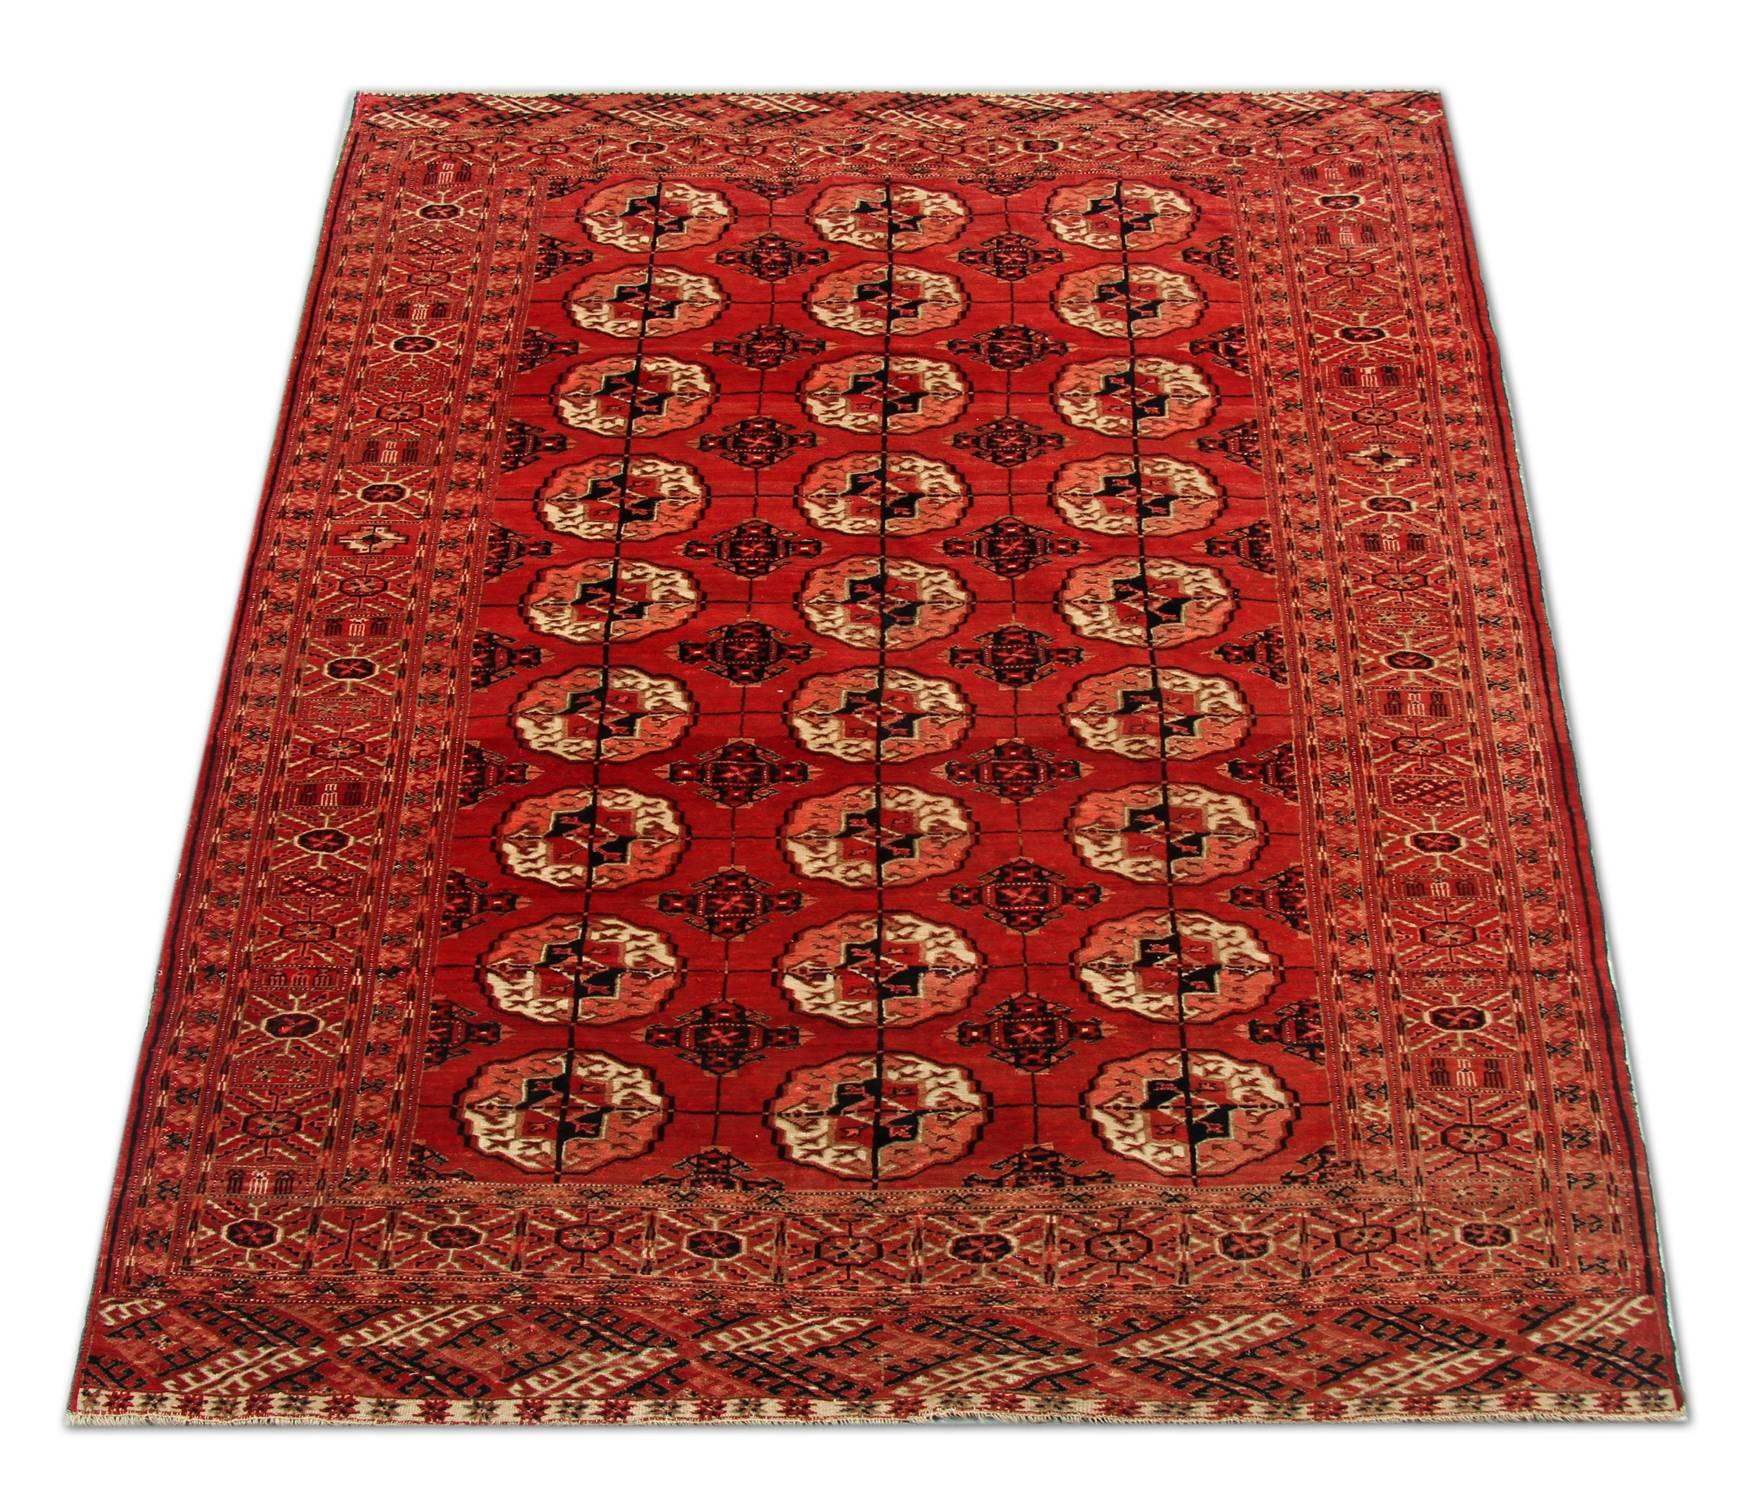 This is an example of fine Afghan red rug made by highly skilled Turkmen handmade rugs weavers in the north of Afghanistan. They have used hand-spun wool and 100% organic dyes for the production of these wool rugs. This tribal rug has repeating